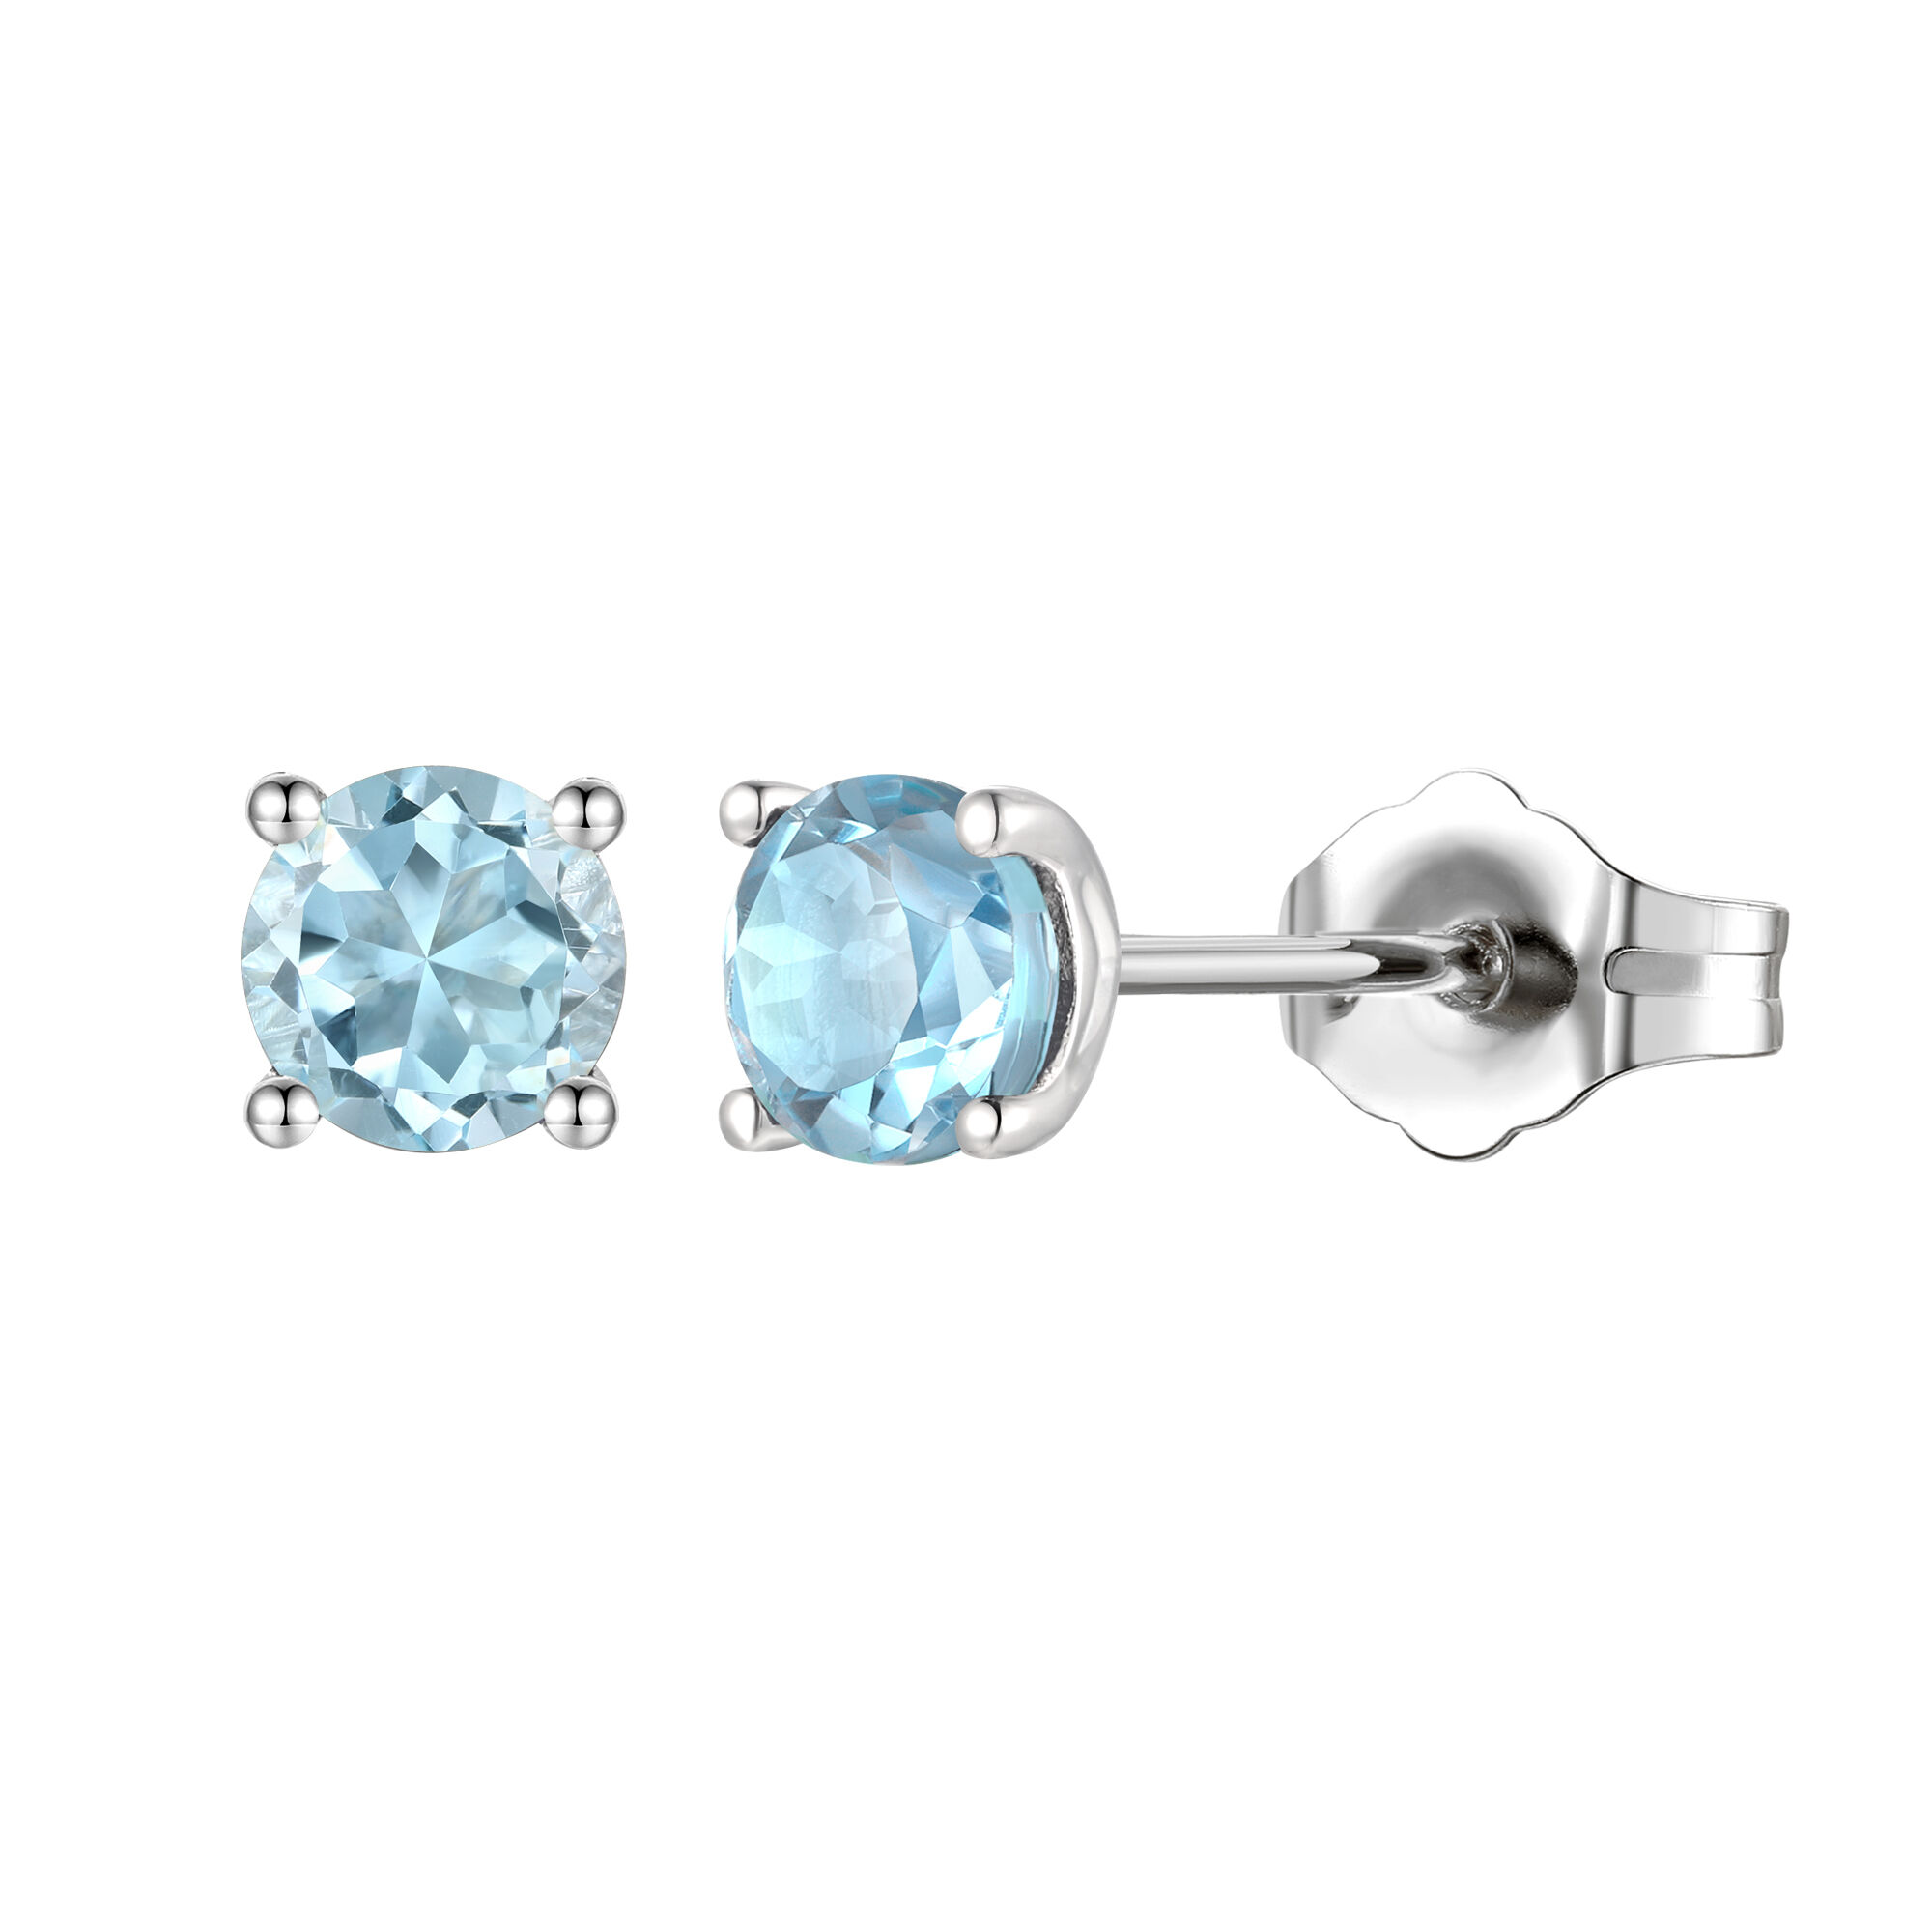 2.56 CTTW Oval Aquamarine and Fancy Diamond Halo Stud Earrings in White  Gold | New York Jewelers Chicago